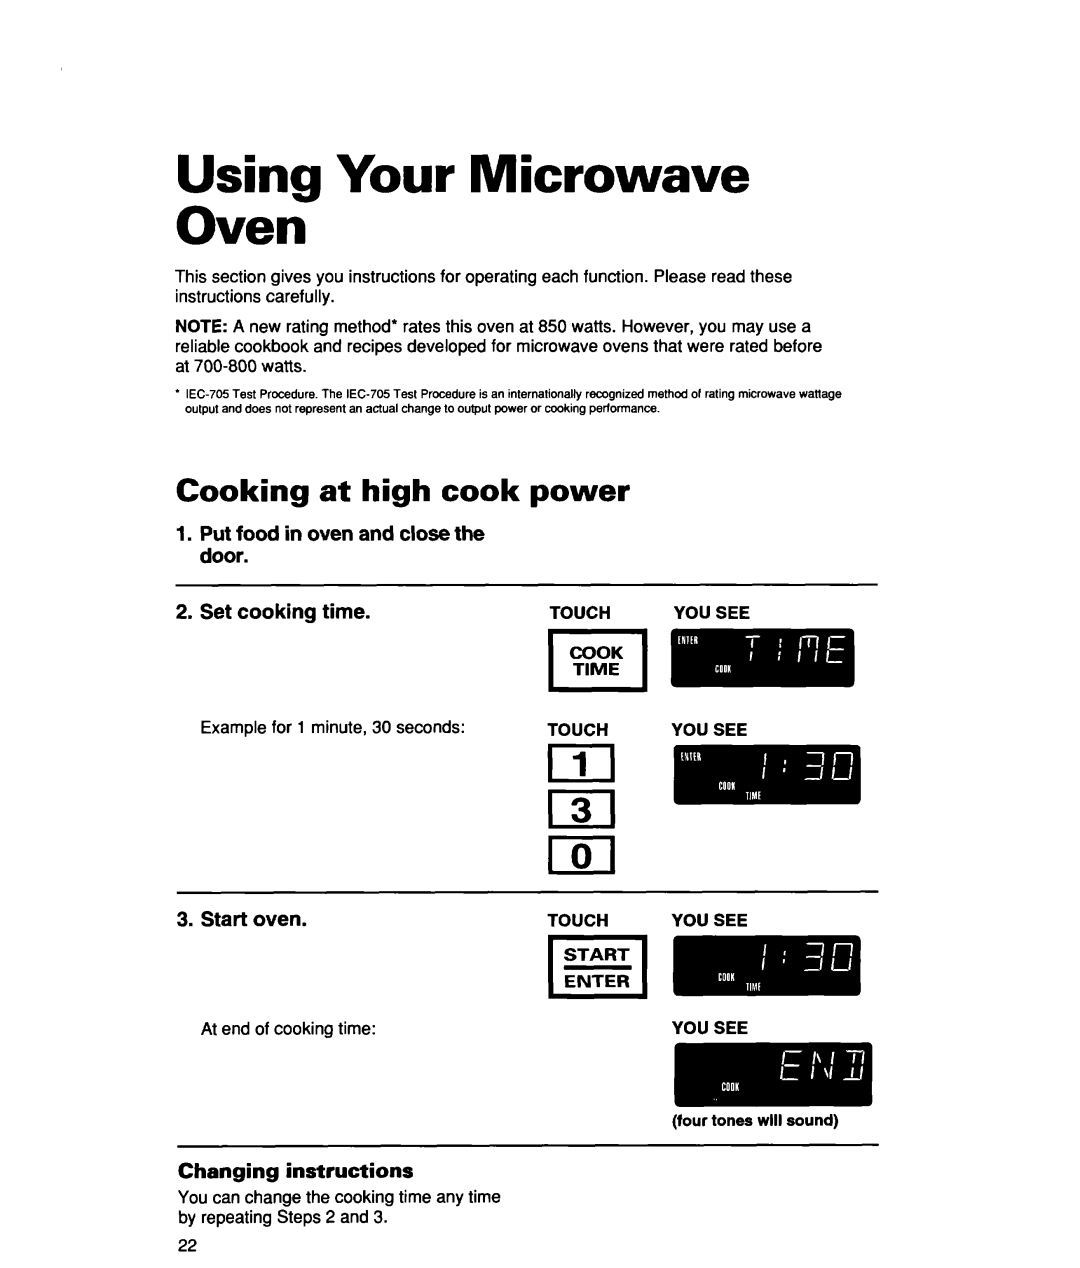 Whirlpool lREB/Q Oven, Cooking at high cook power, Put food in oven and close the door, Set cooking time, Start oven 